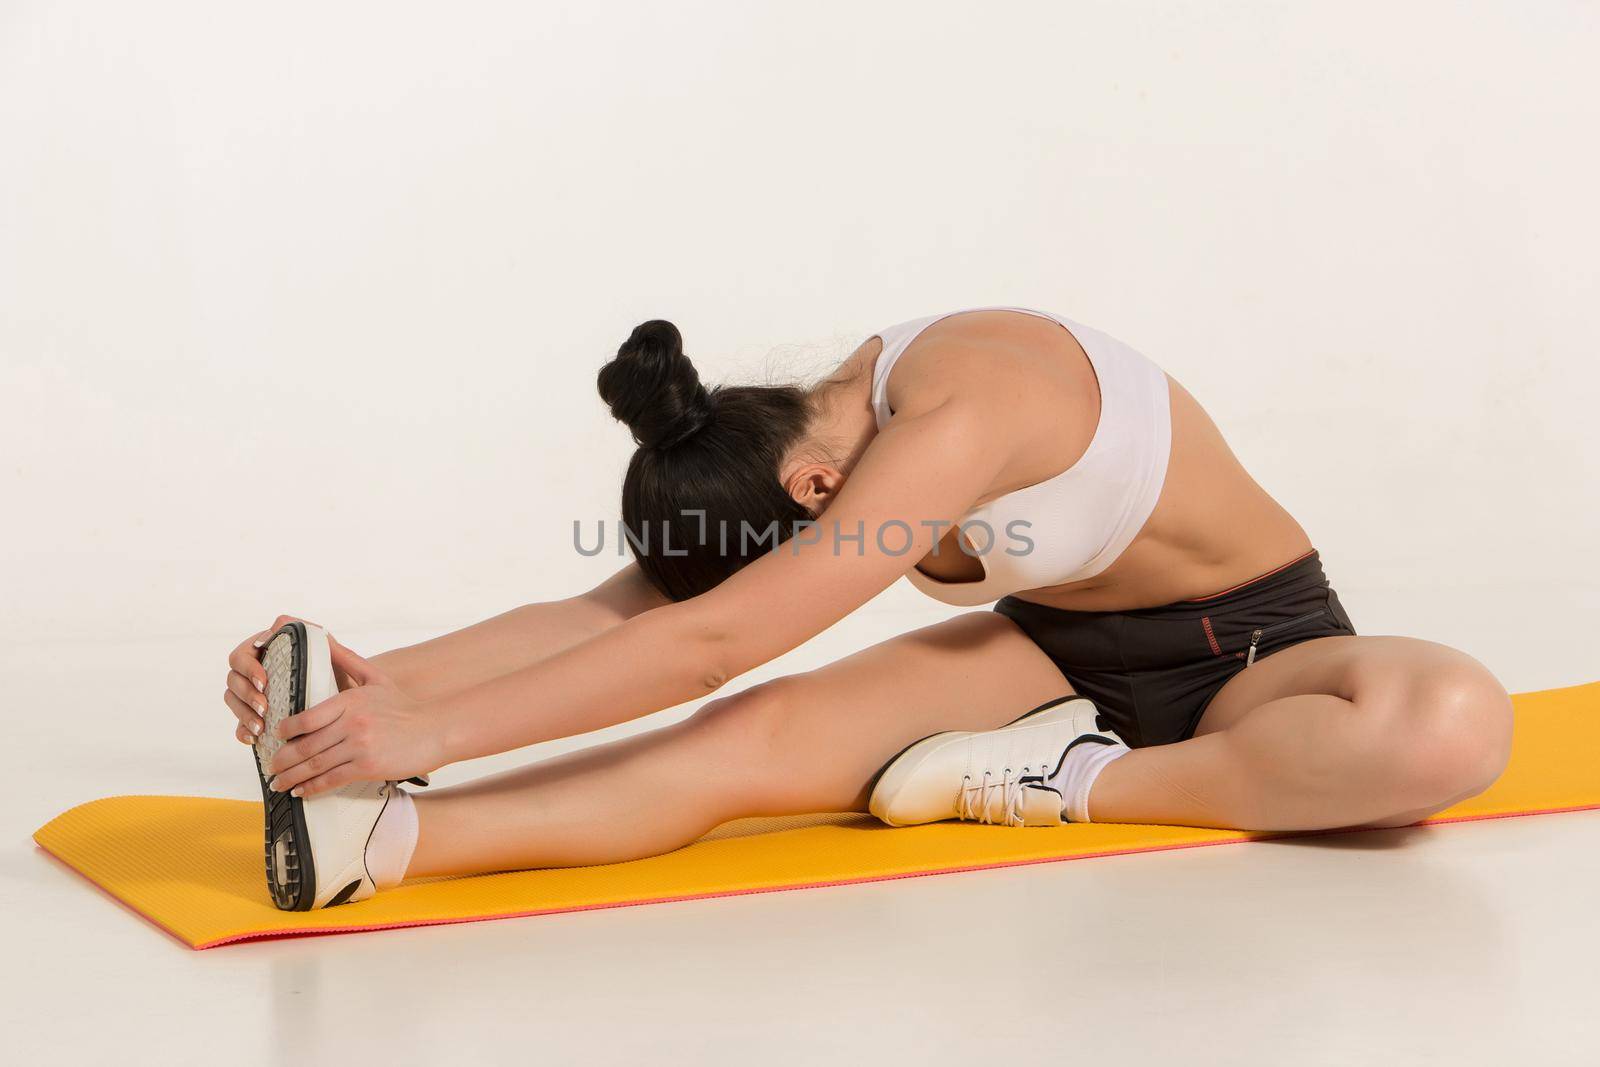 attractive woman doing exercises. Brunette fit body on yoga mat by nazarovsergey